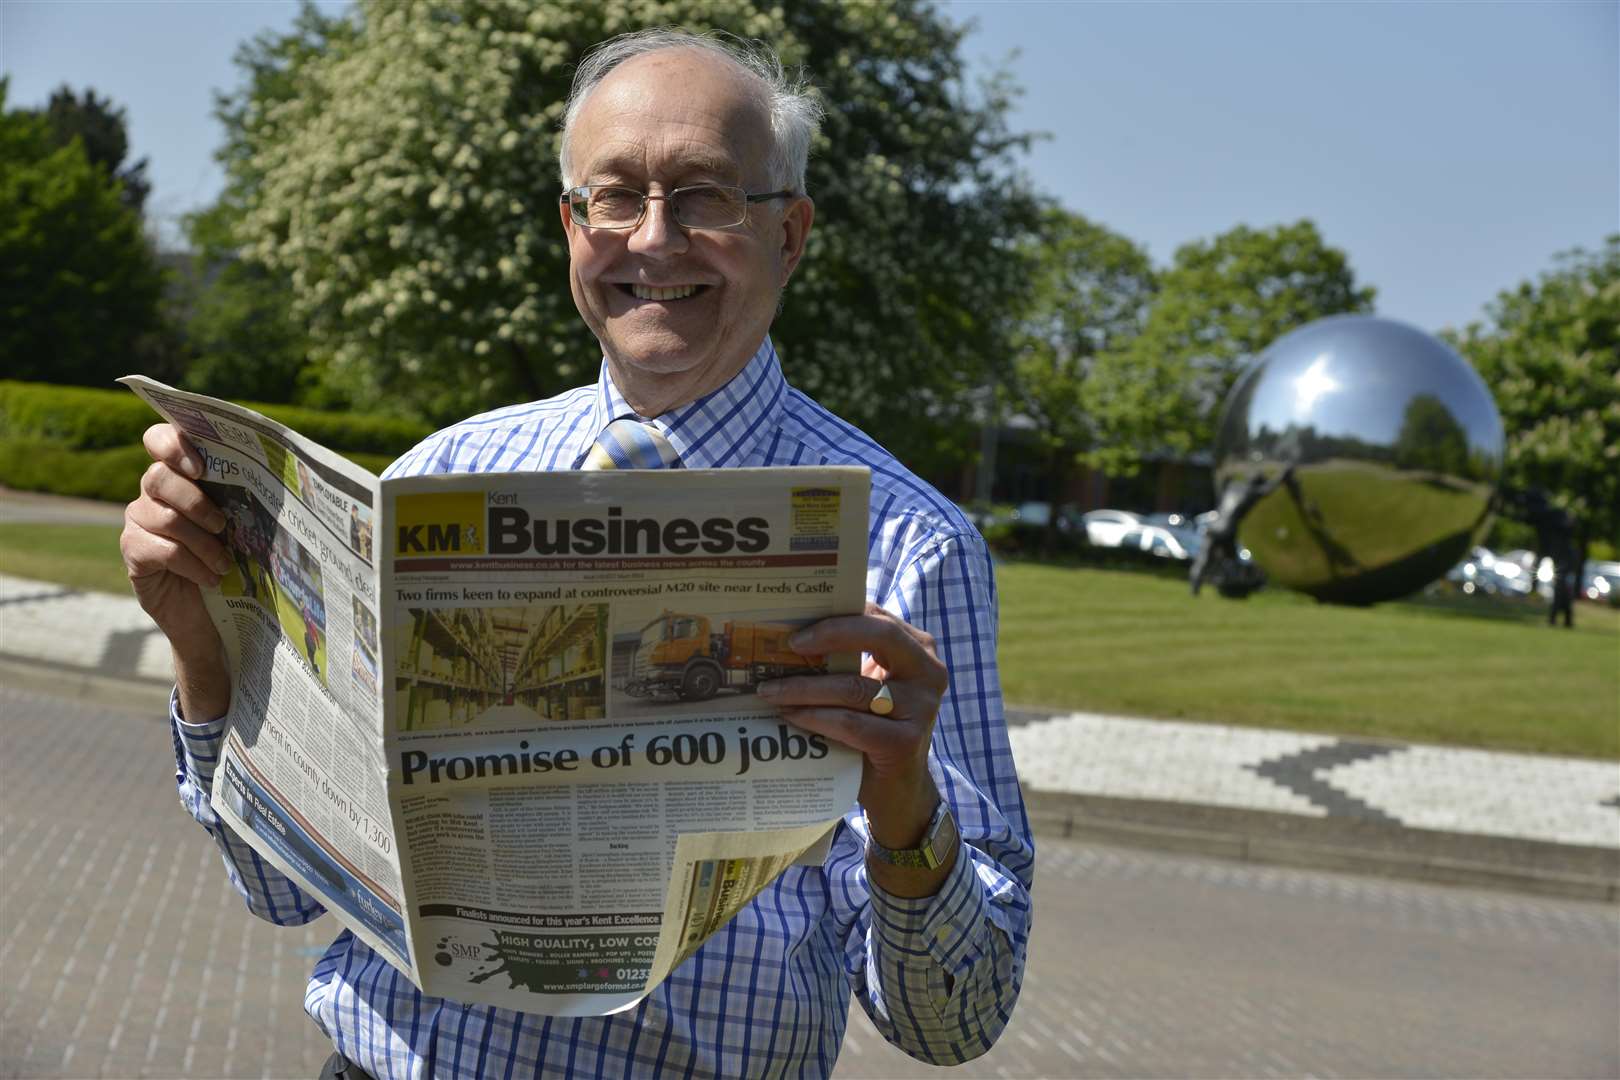 Former KM Group business editor Trevor Sturgess launched Kent Business 25 years ago